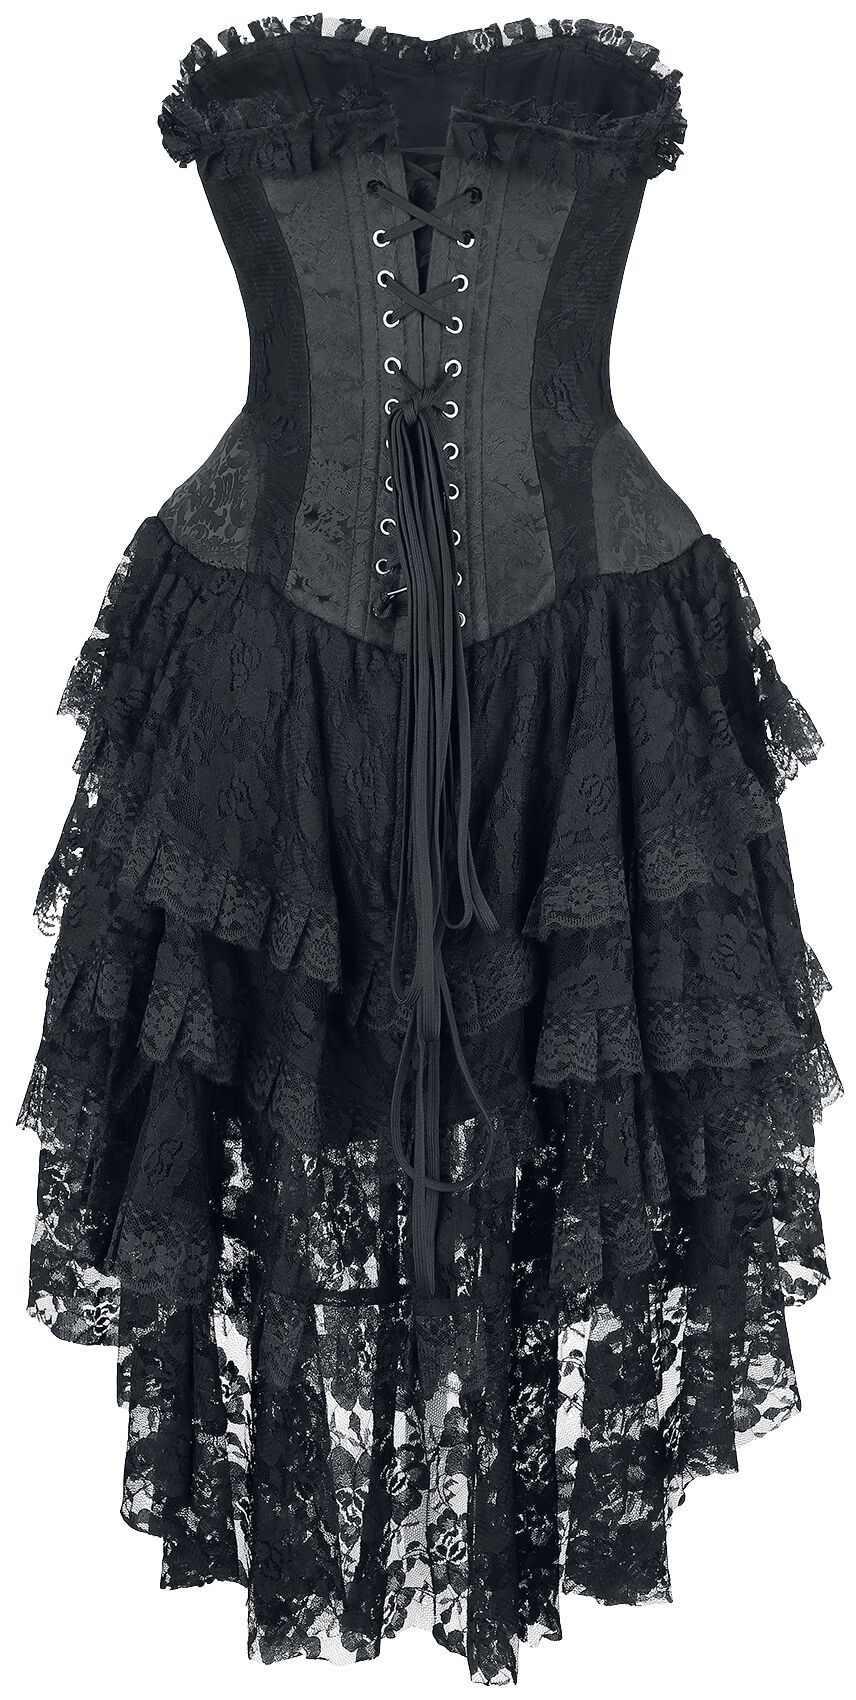 Elaborate Gothic Dress with Corset and Shorter-Front Skirt